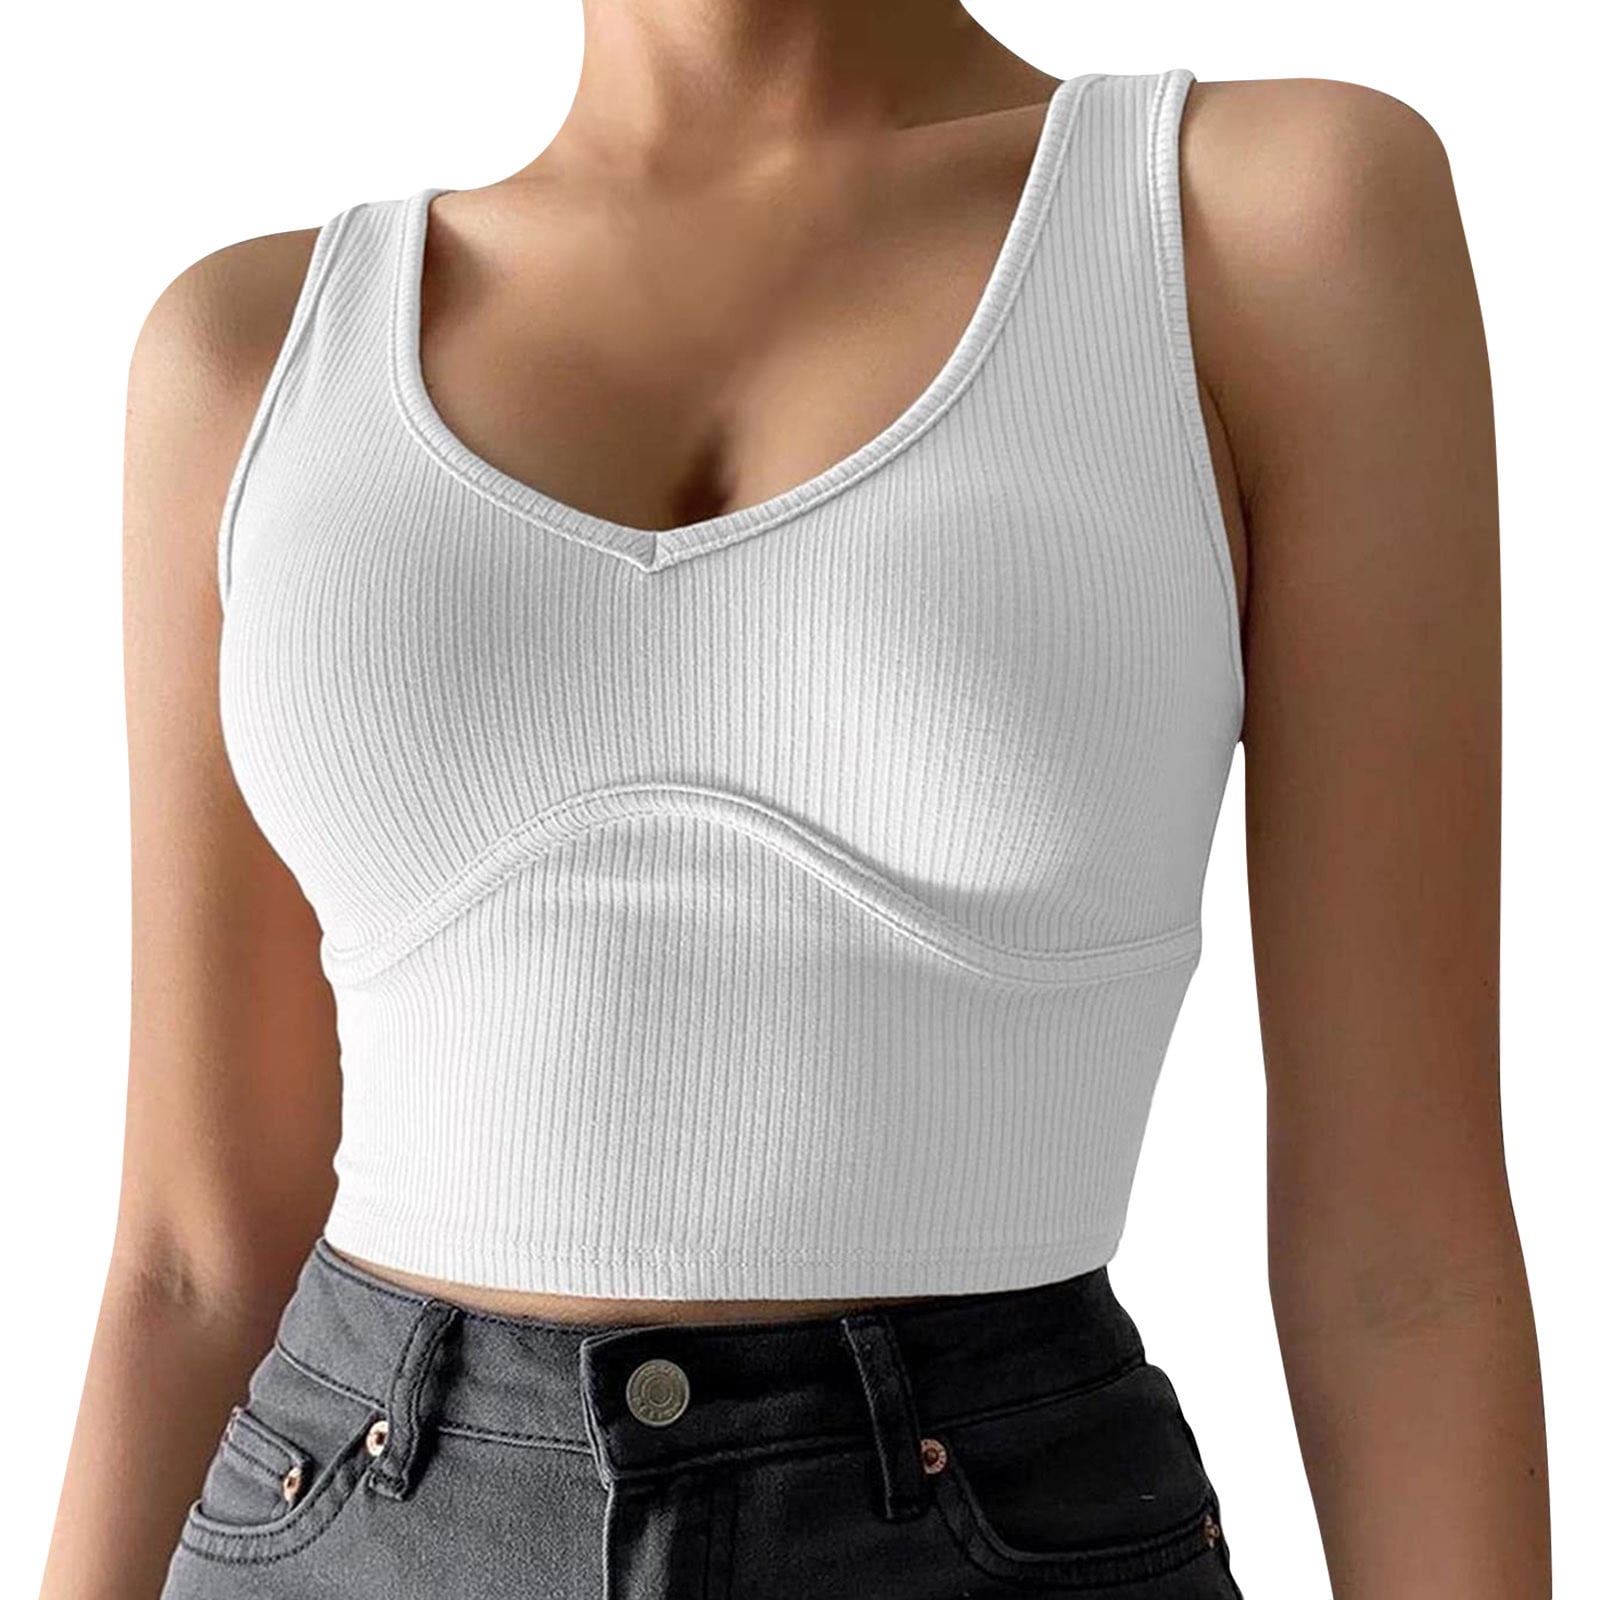 jaceyduprie designed the perfect ribbed tank top and we're